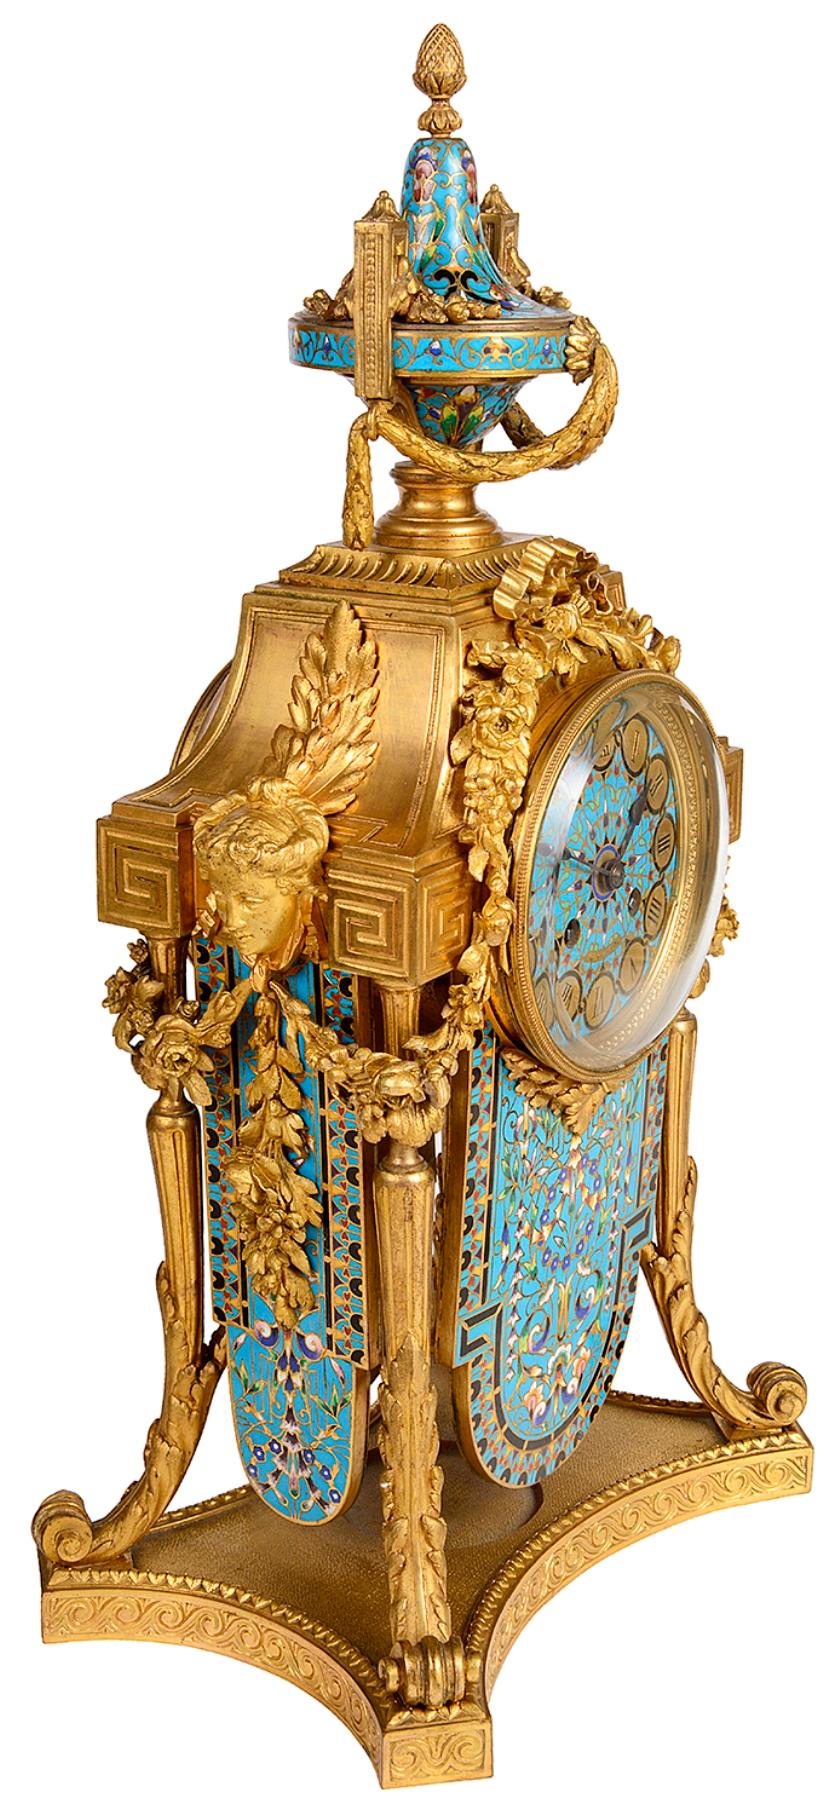 A wonderful quality late 19th century French Louis XVI style gilded ormolu and Champlevé enamel clock garniture, the clock having a two handled turquoise enamel urn with swags above the floral and ribbon decorated eight day duration hour and half